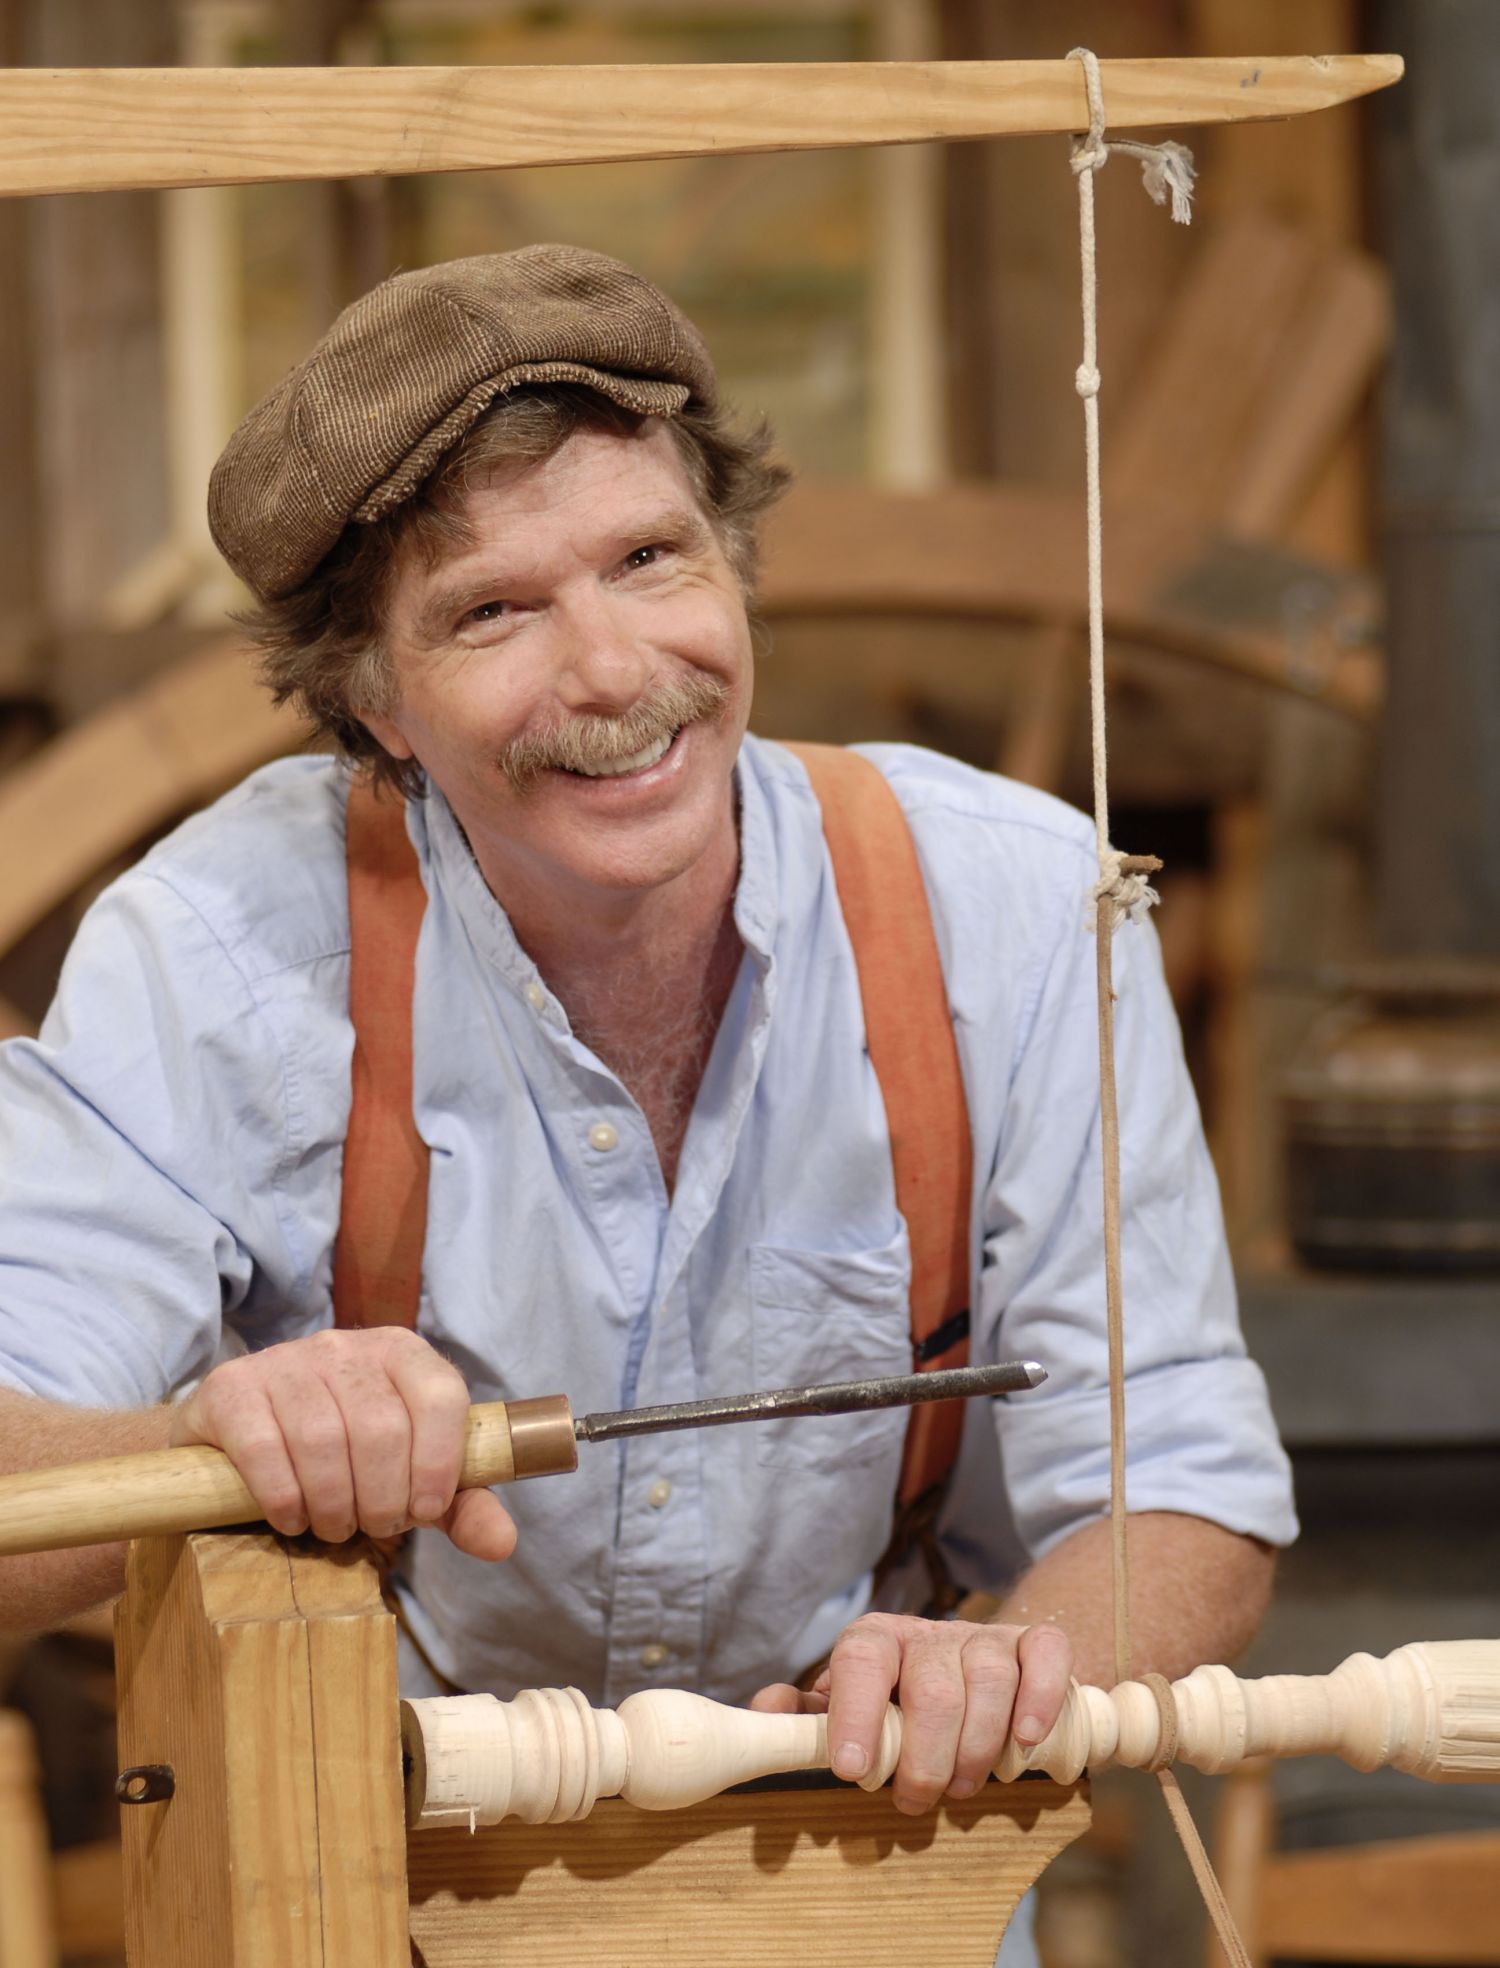 Woodworking in America 2015 - Home